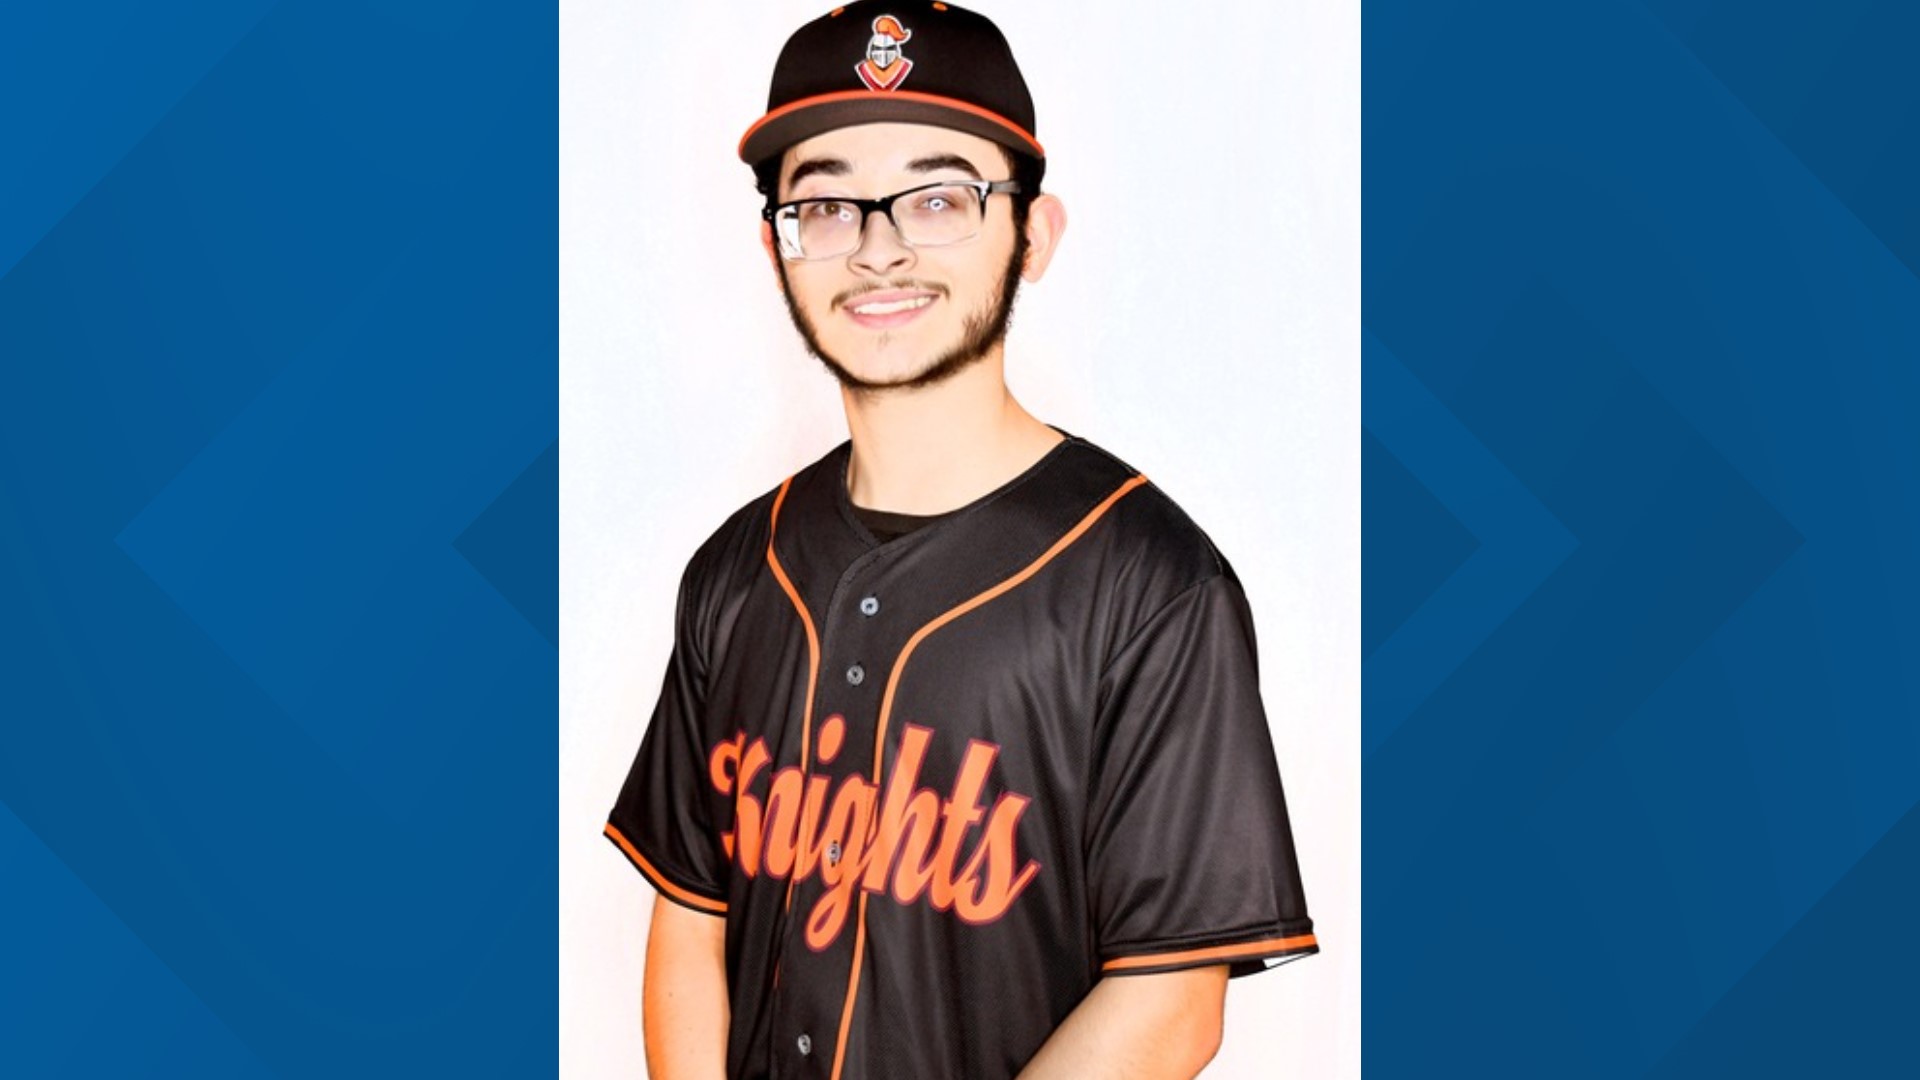 Angel Mercado-Ocasio, 19, passed away at the hospital Tuesday night after being crushed by a wooden dugout that collapsed on Monday.